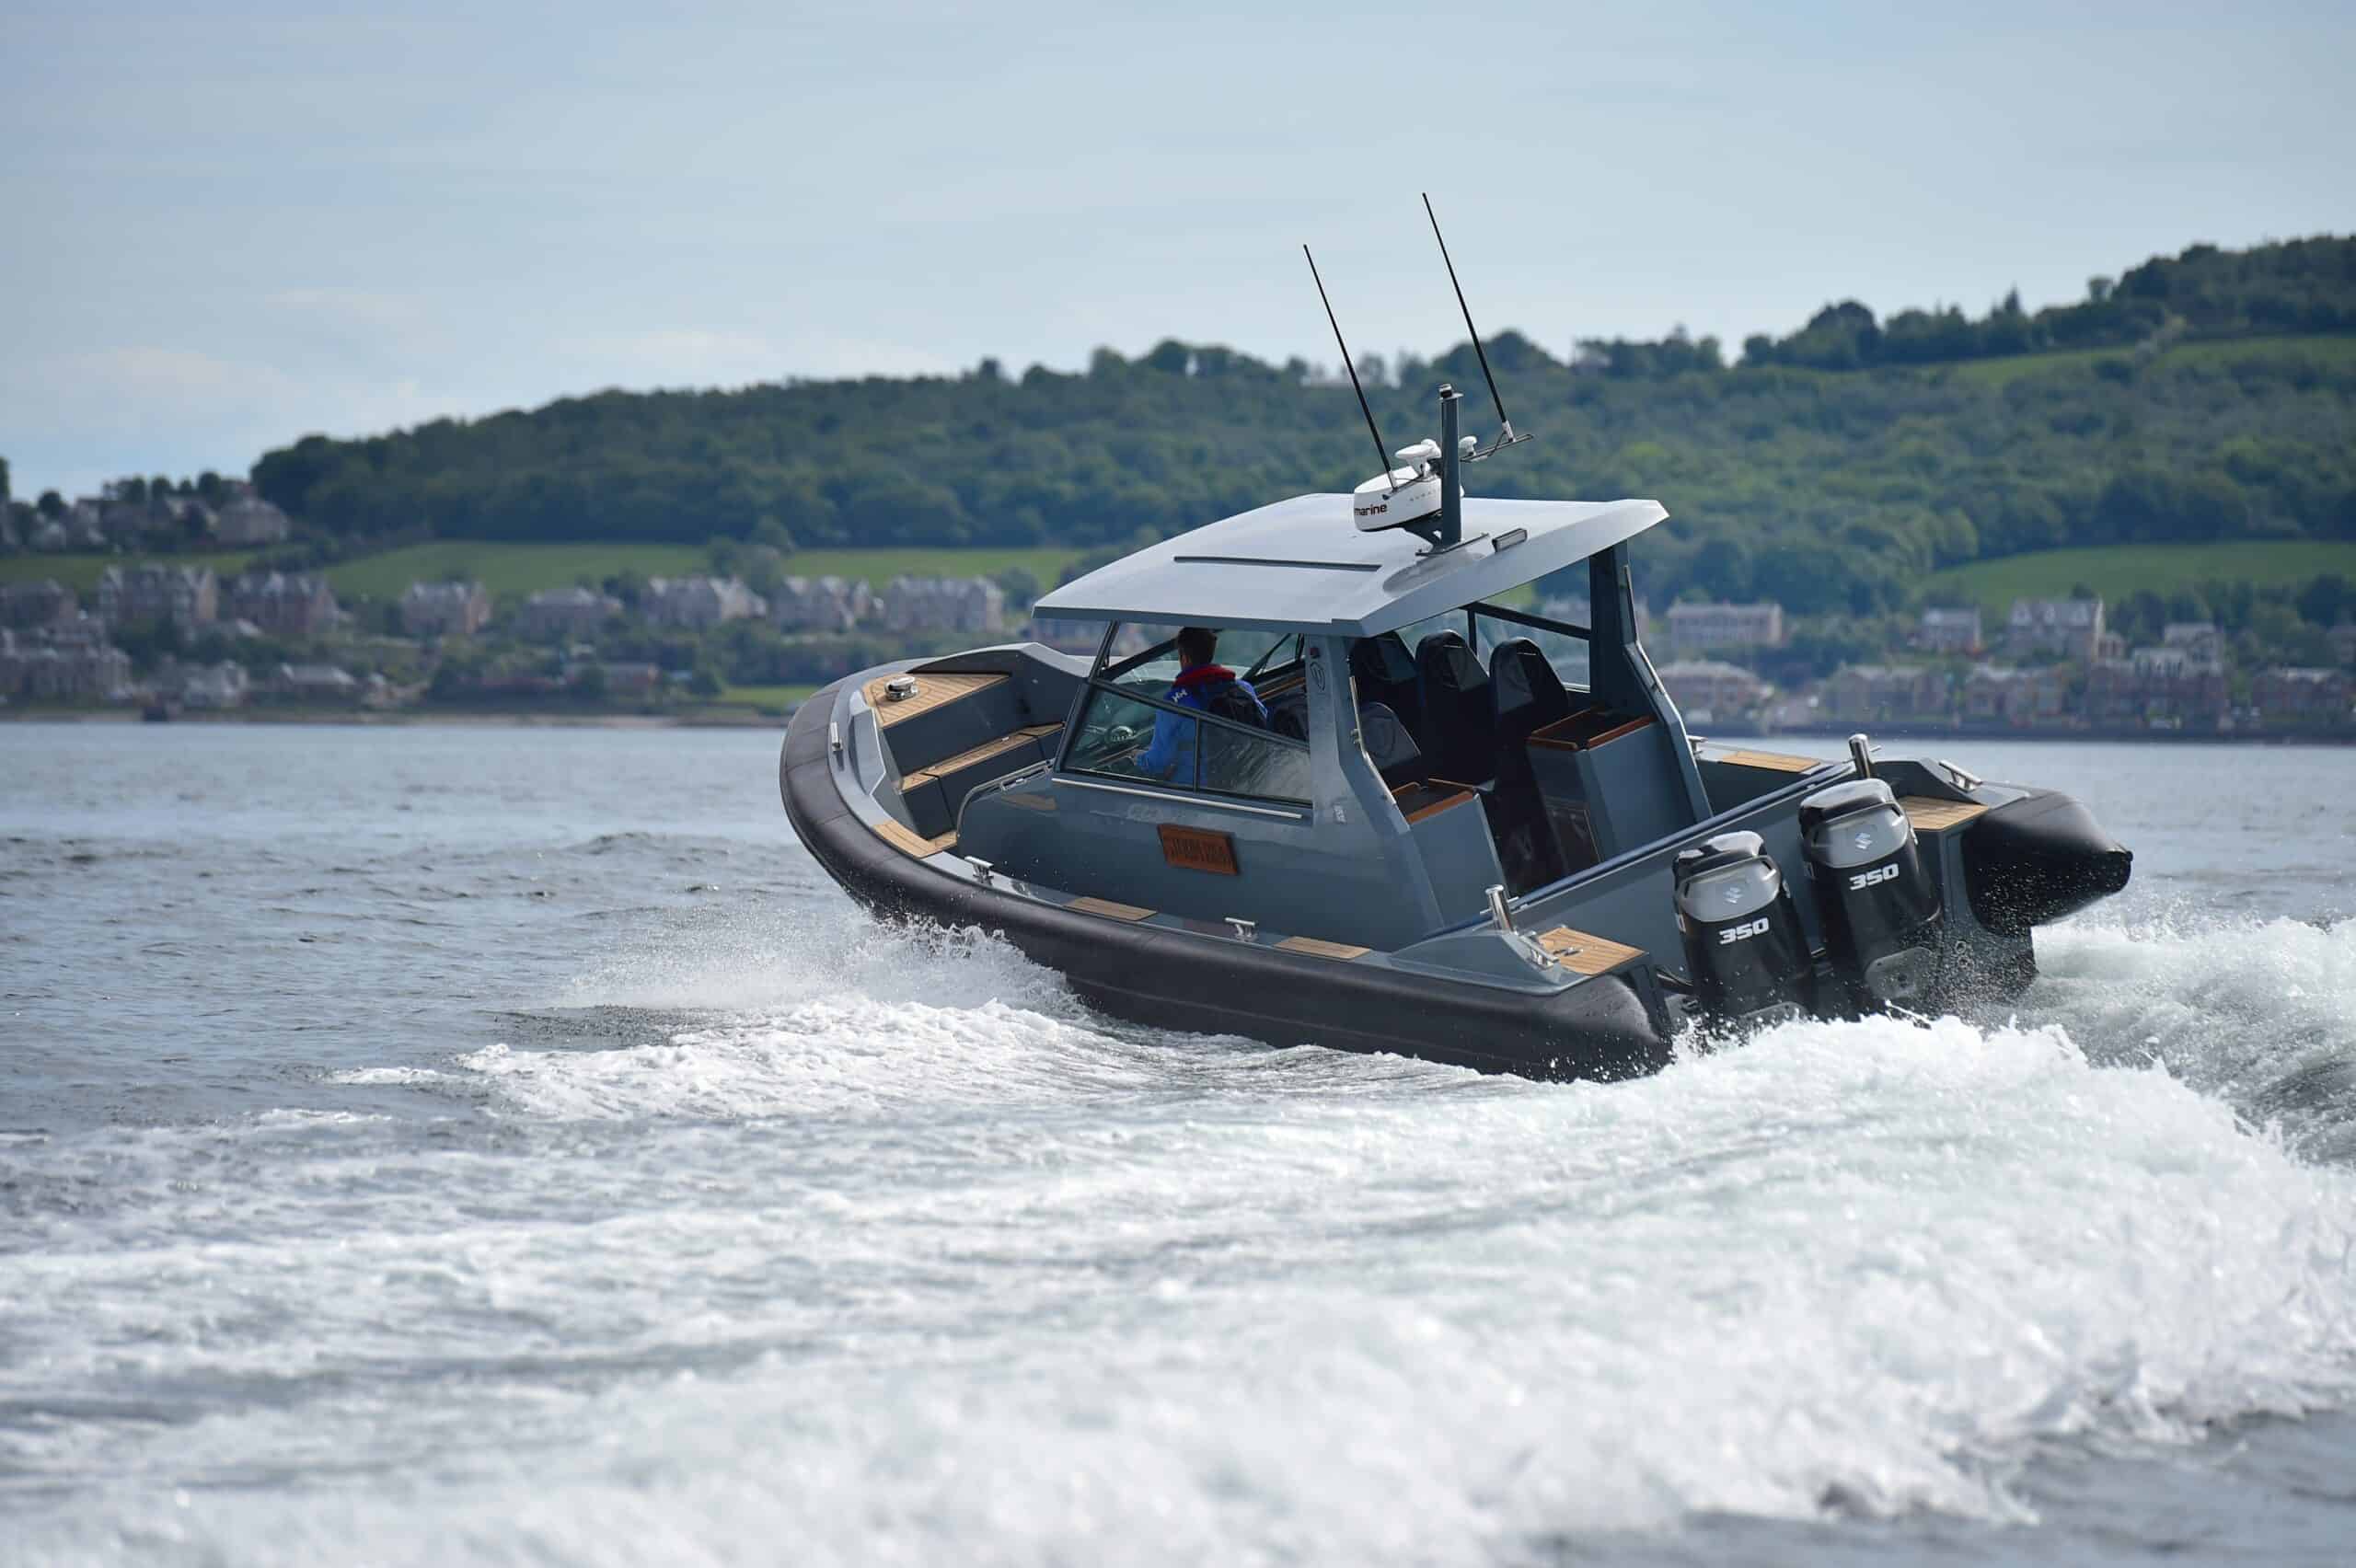 John Moxham Internationally Renowned Naval Architect and Ultimate Boats @ RIBs ONLY - Home of the Rigid Inflatable Boat